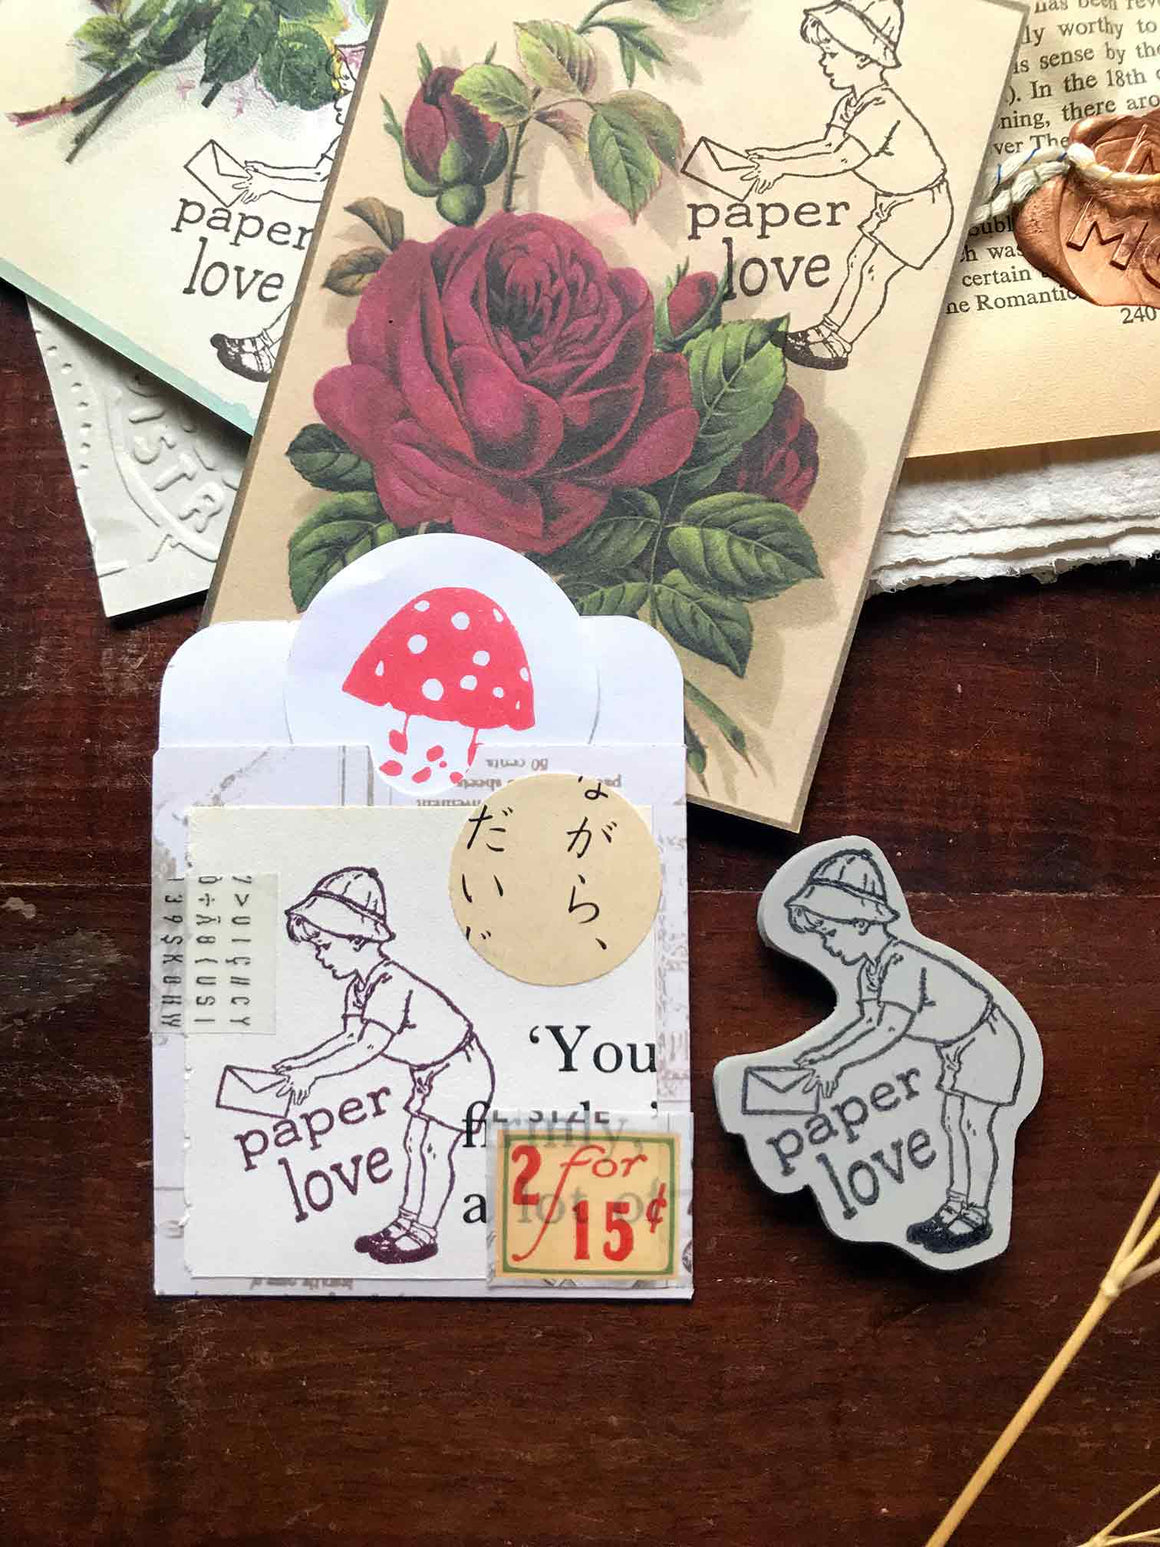 Pre-order 'Paper Love' Rubber Stamp by Mic Moc (紙への愛 )from micmoc.com  Edit alt text